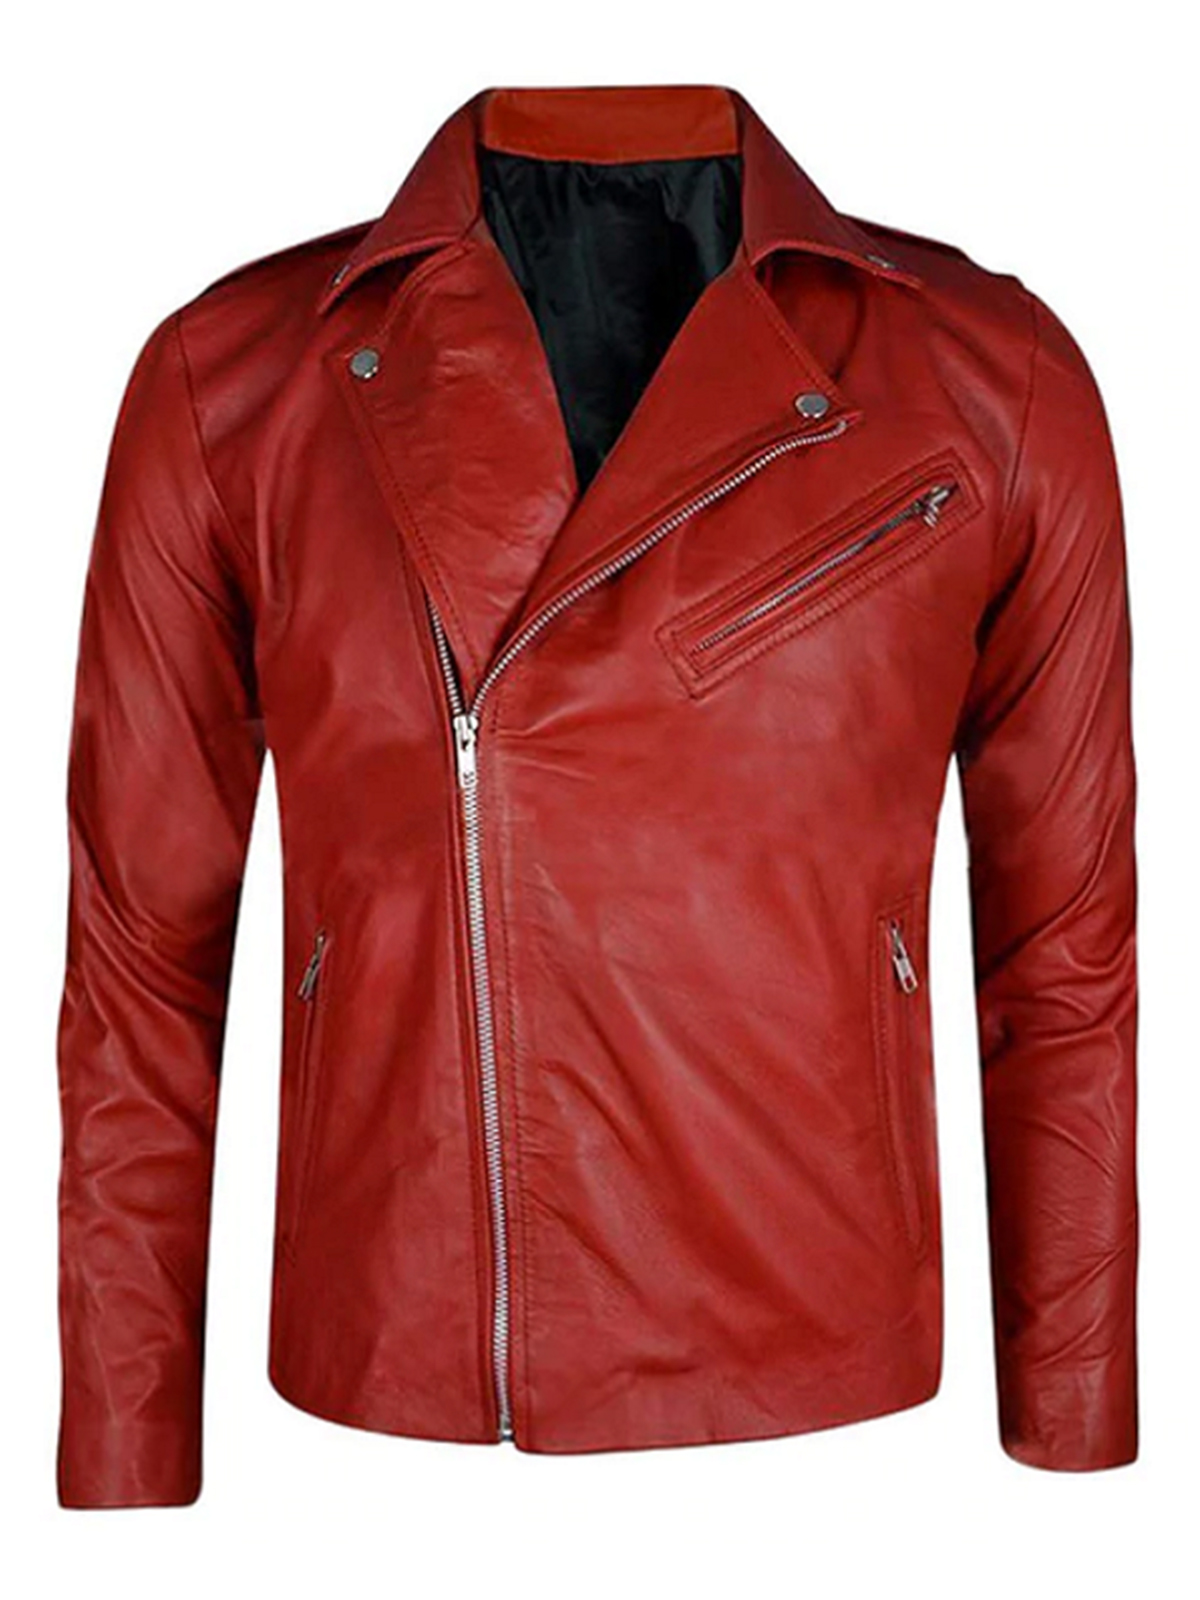 Fergal Devitt Motorcycle Red Leather Jacket – Bay Perfect